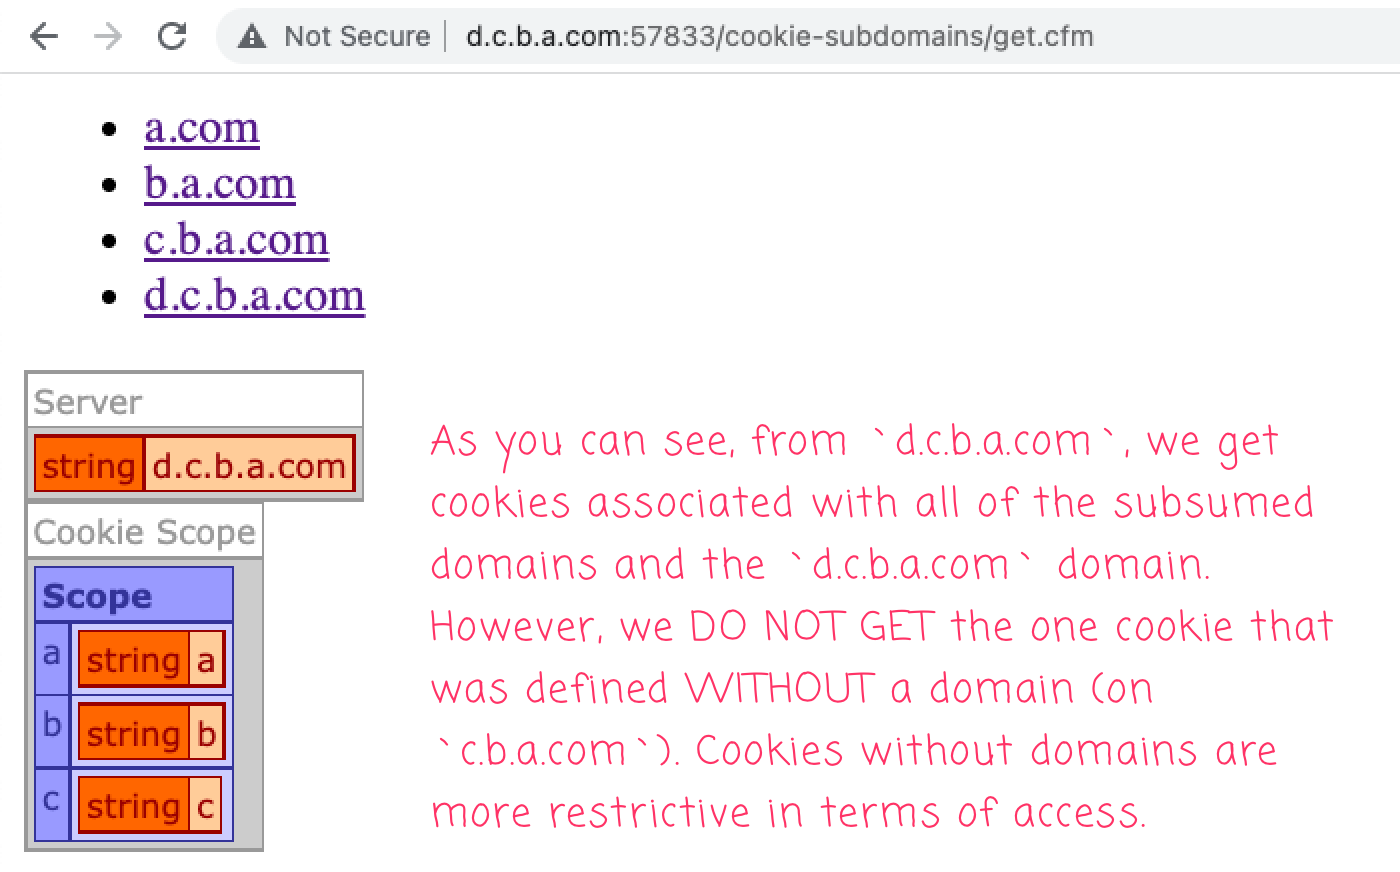 Accessing cookies on 'd.c.b.a.com' provies all the cookies from the subsumed subdomains; but, does not provide the cookie that was set without a domain.